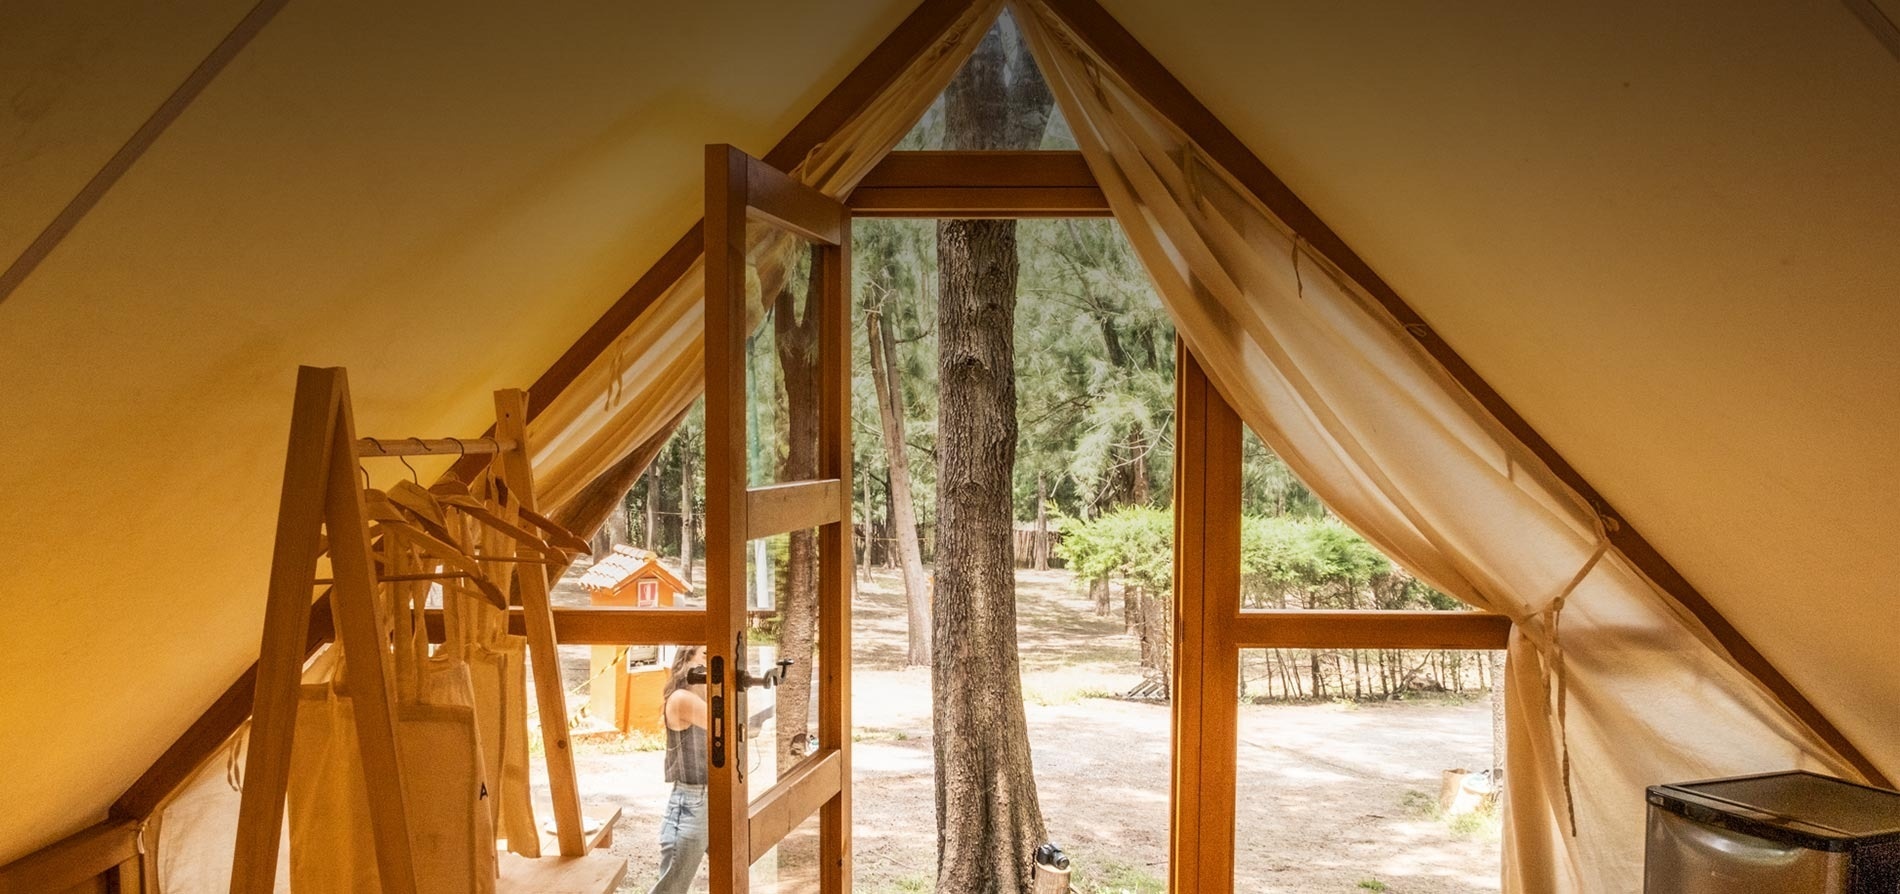 a view of a forest through a window in a tent